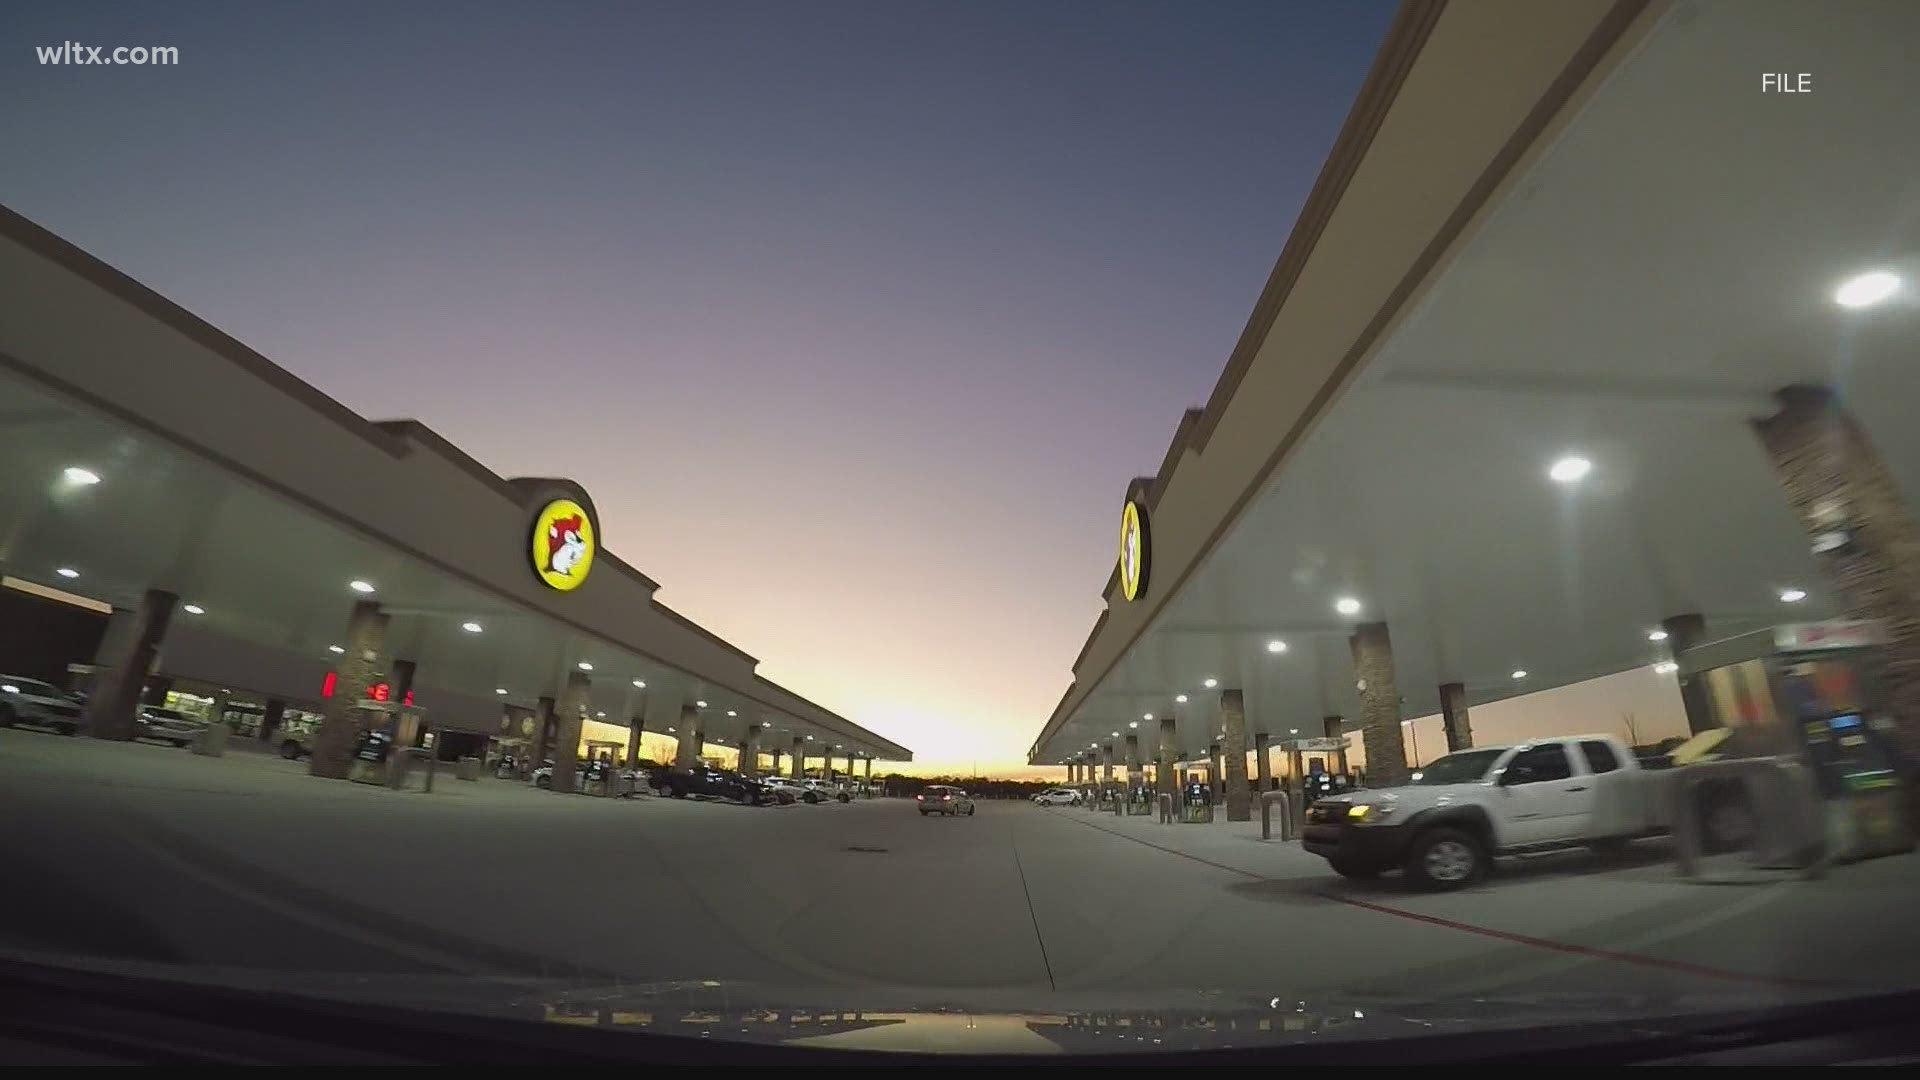 The first Buc-ee's to open in South Carolina will break ground in Florence Nov. 19 and is set to open in 2022.